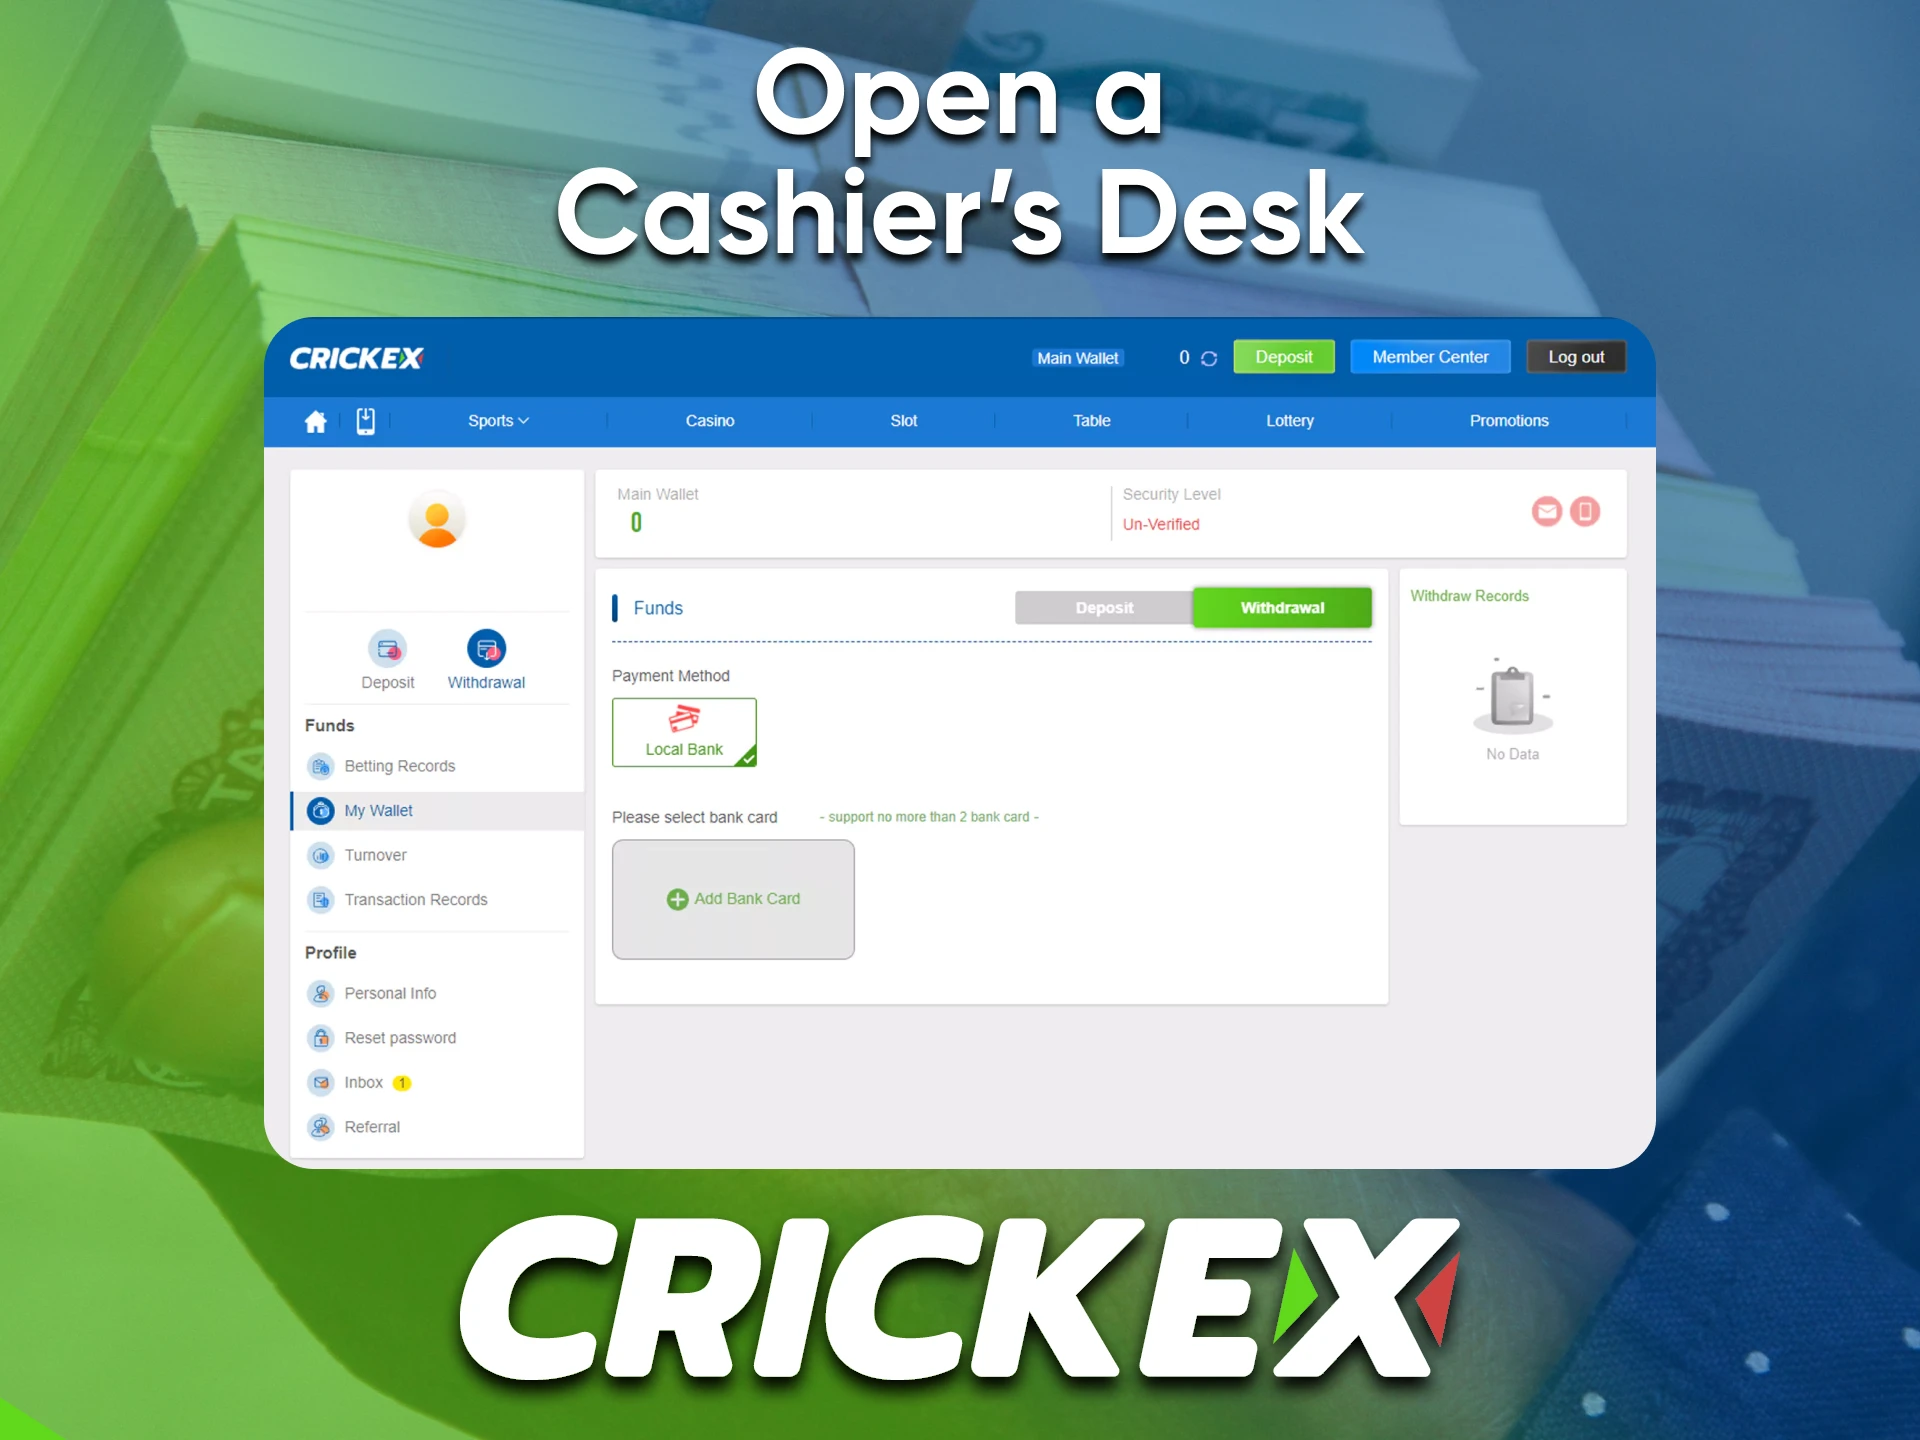 To withdraw funds, go to the appropriate section on the Crickex website.